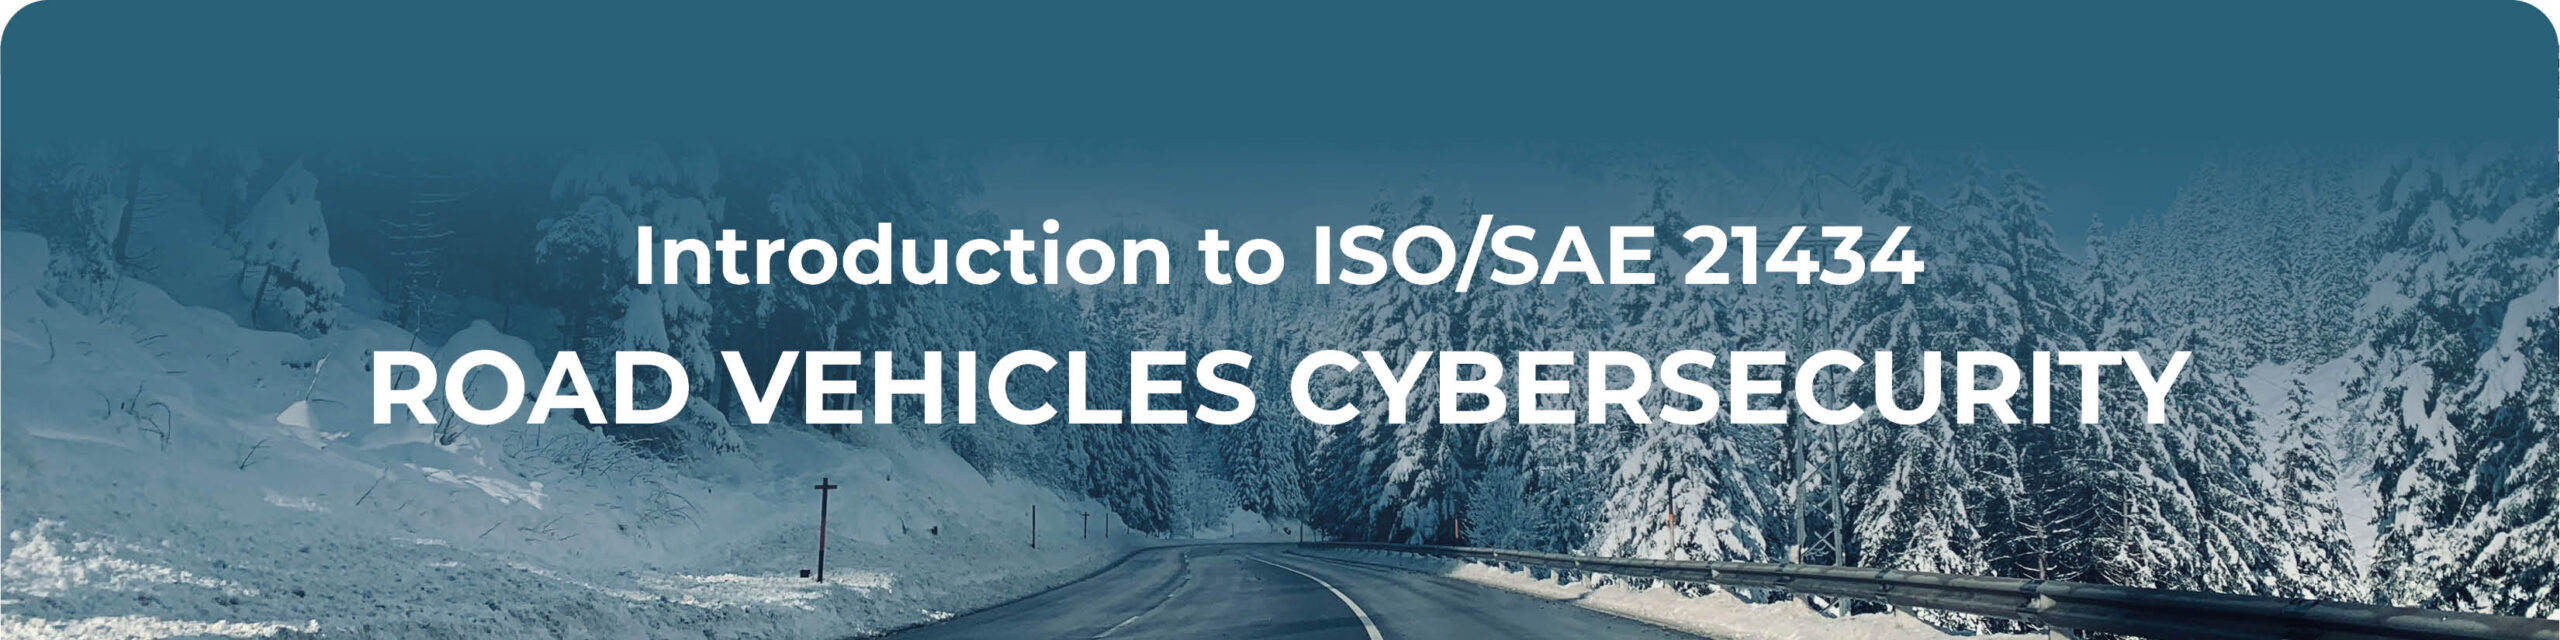 Introduction to ISO/SAE 21434 Road vehicles Cybersecurity